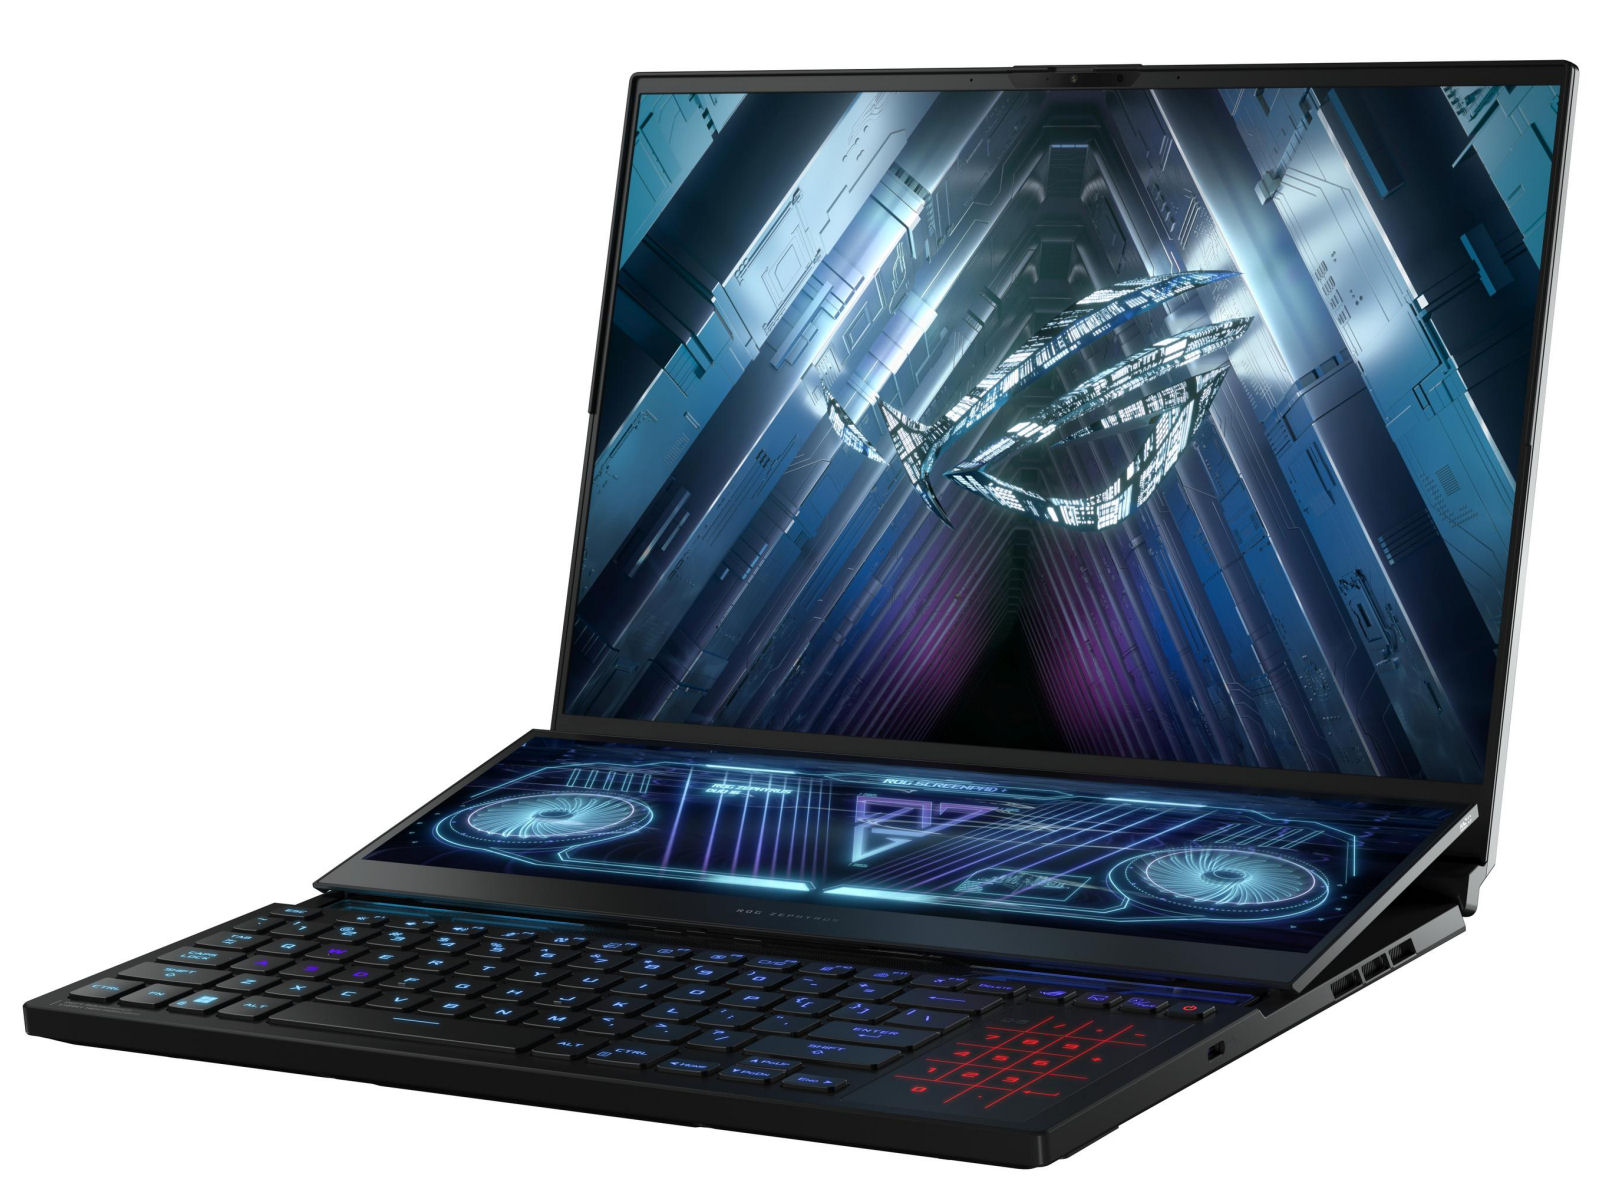 Asus ROG Zephyrus Duo 15 review: a gaming laptop that doesn't need